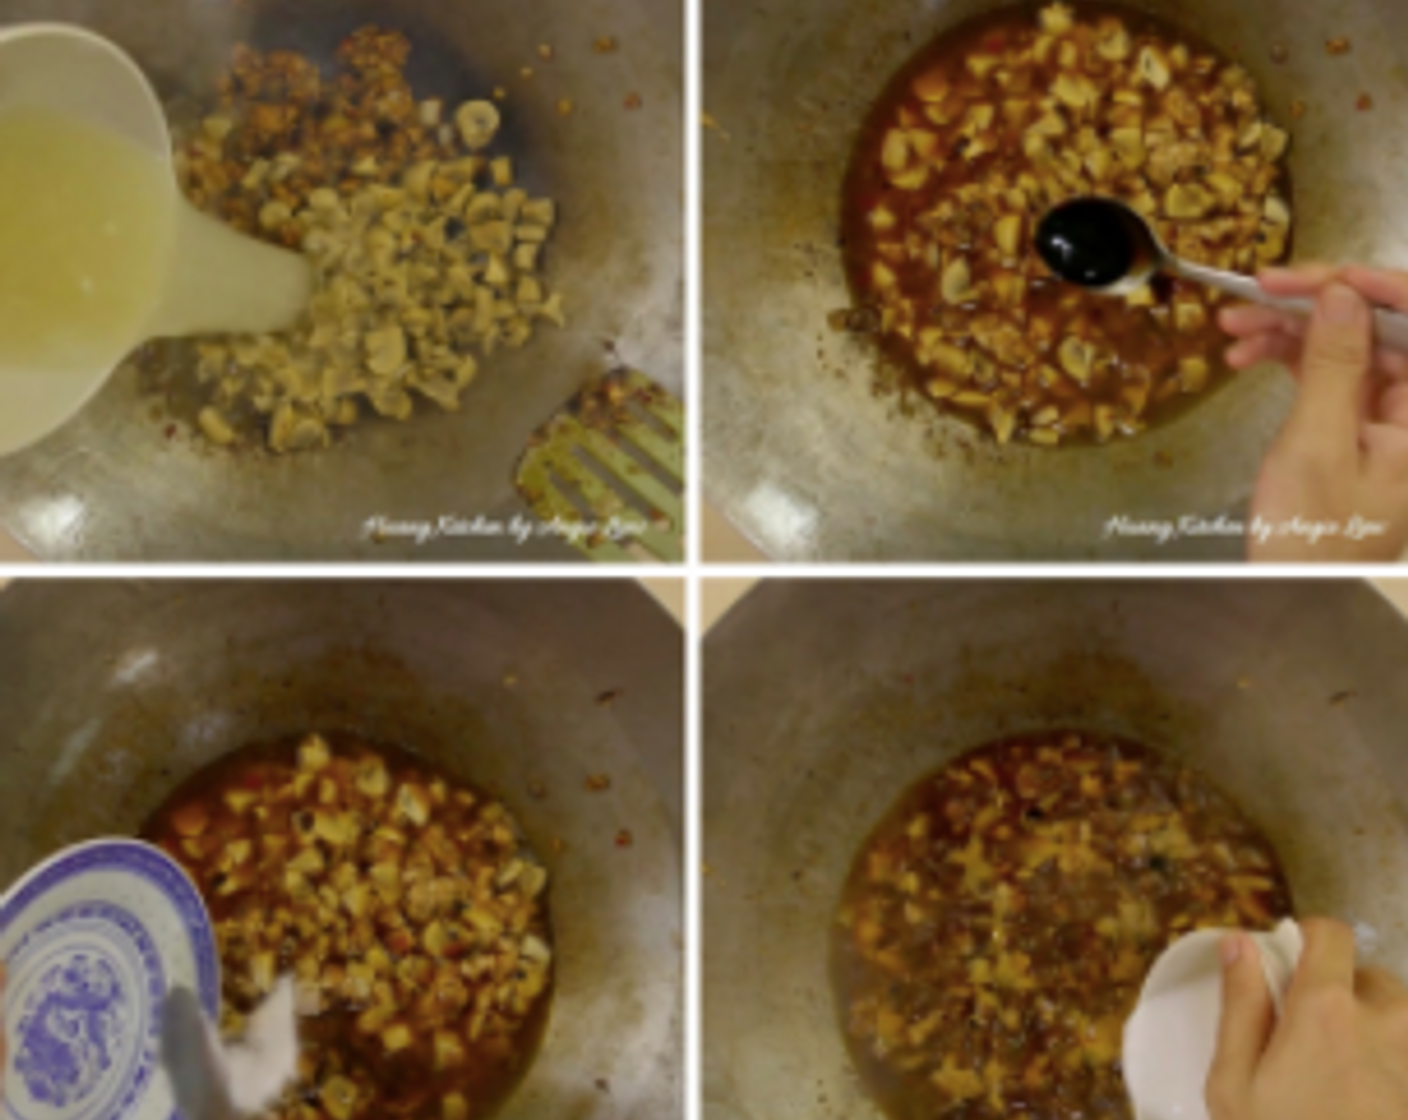 step 5 Next, add in Chicken Stock (1 1/4 cups) and Soy Sauce (1/2 Tbsp), Dark Soy Sauce (1/2 Tbsp), Granulated Sugar (1/2 Tbsp), Corn Starch (1/2 Tbsp) and Ground White Pepper (1/4 tsp). Bring the stock mixture to a boil.